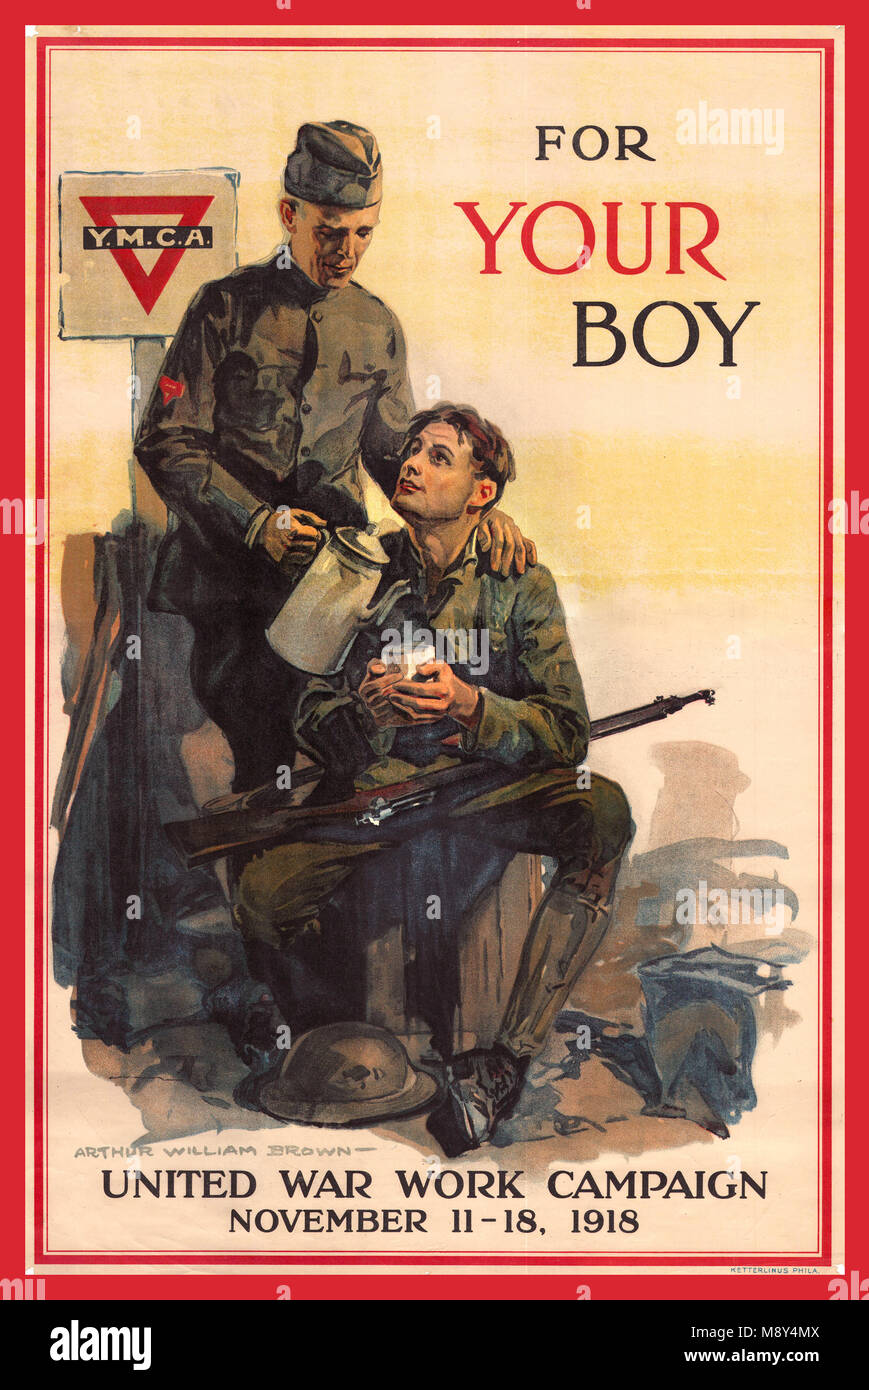 World War 1 Vintage American Propaganda Poster 'FOR YOUR BOY' WW1 illustrating United Work Campaign by The YMCA aid movement November 1918 Stock Photo